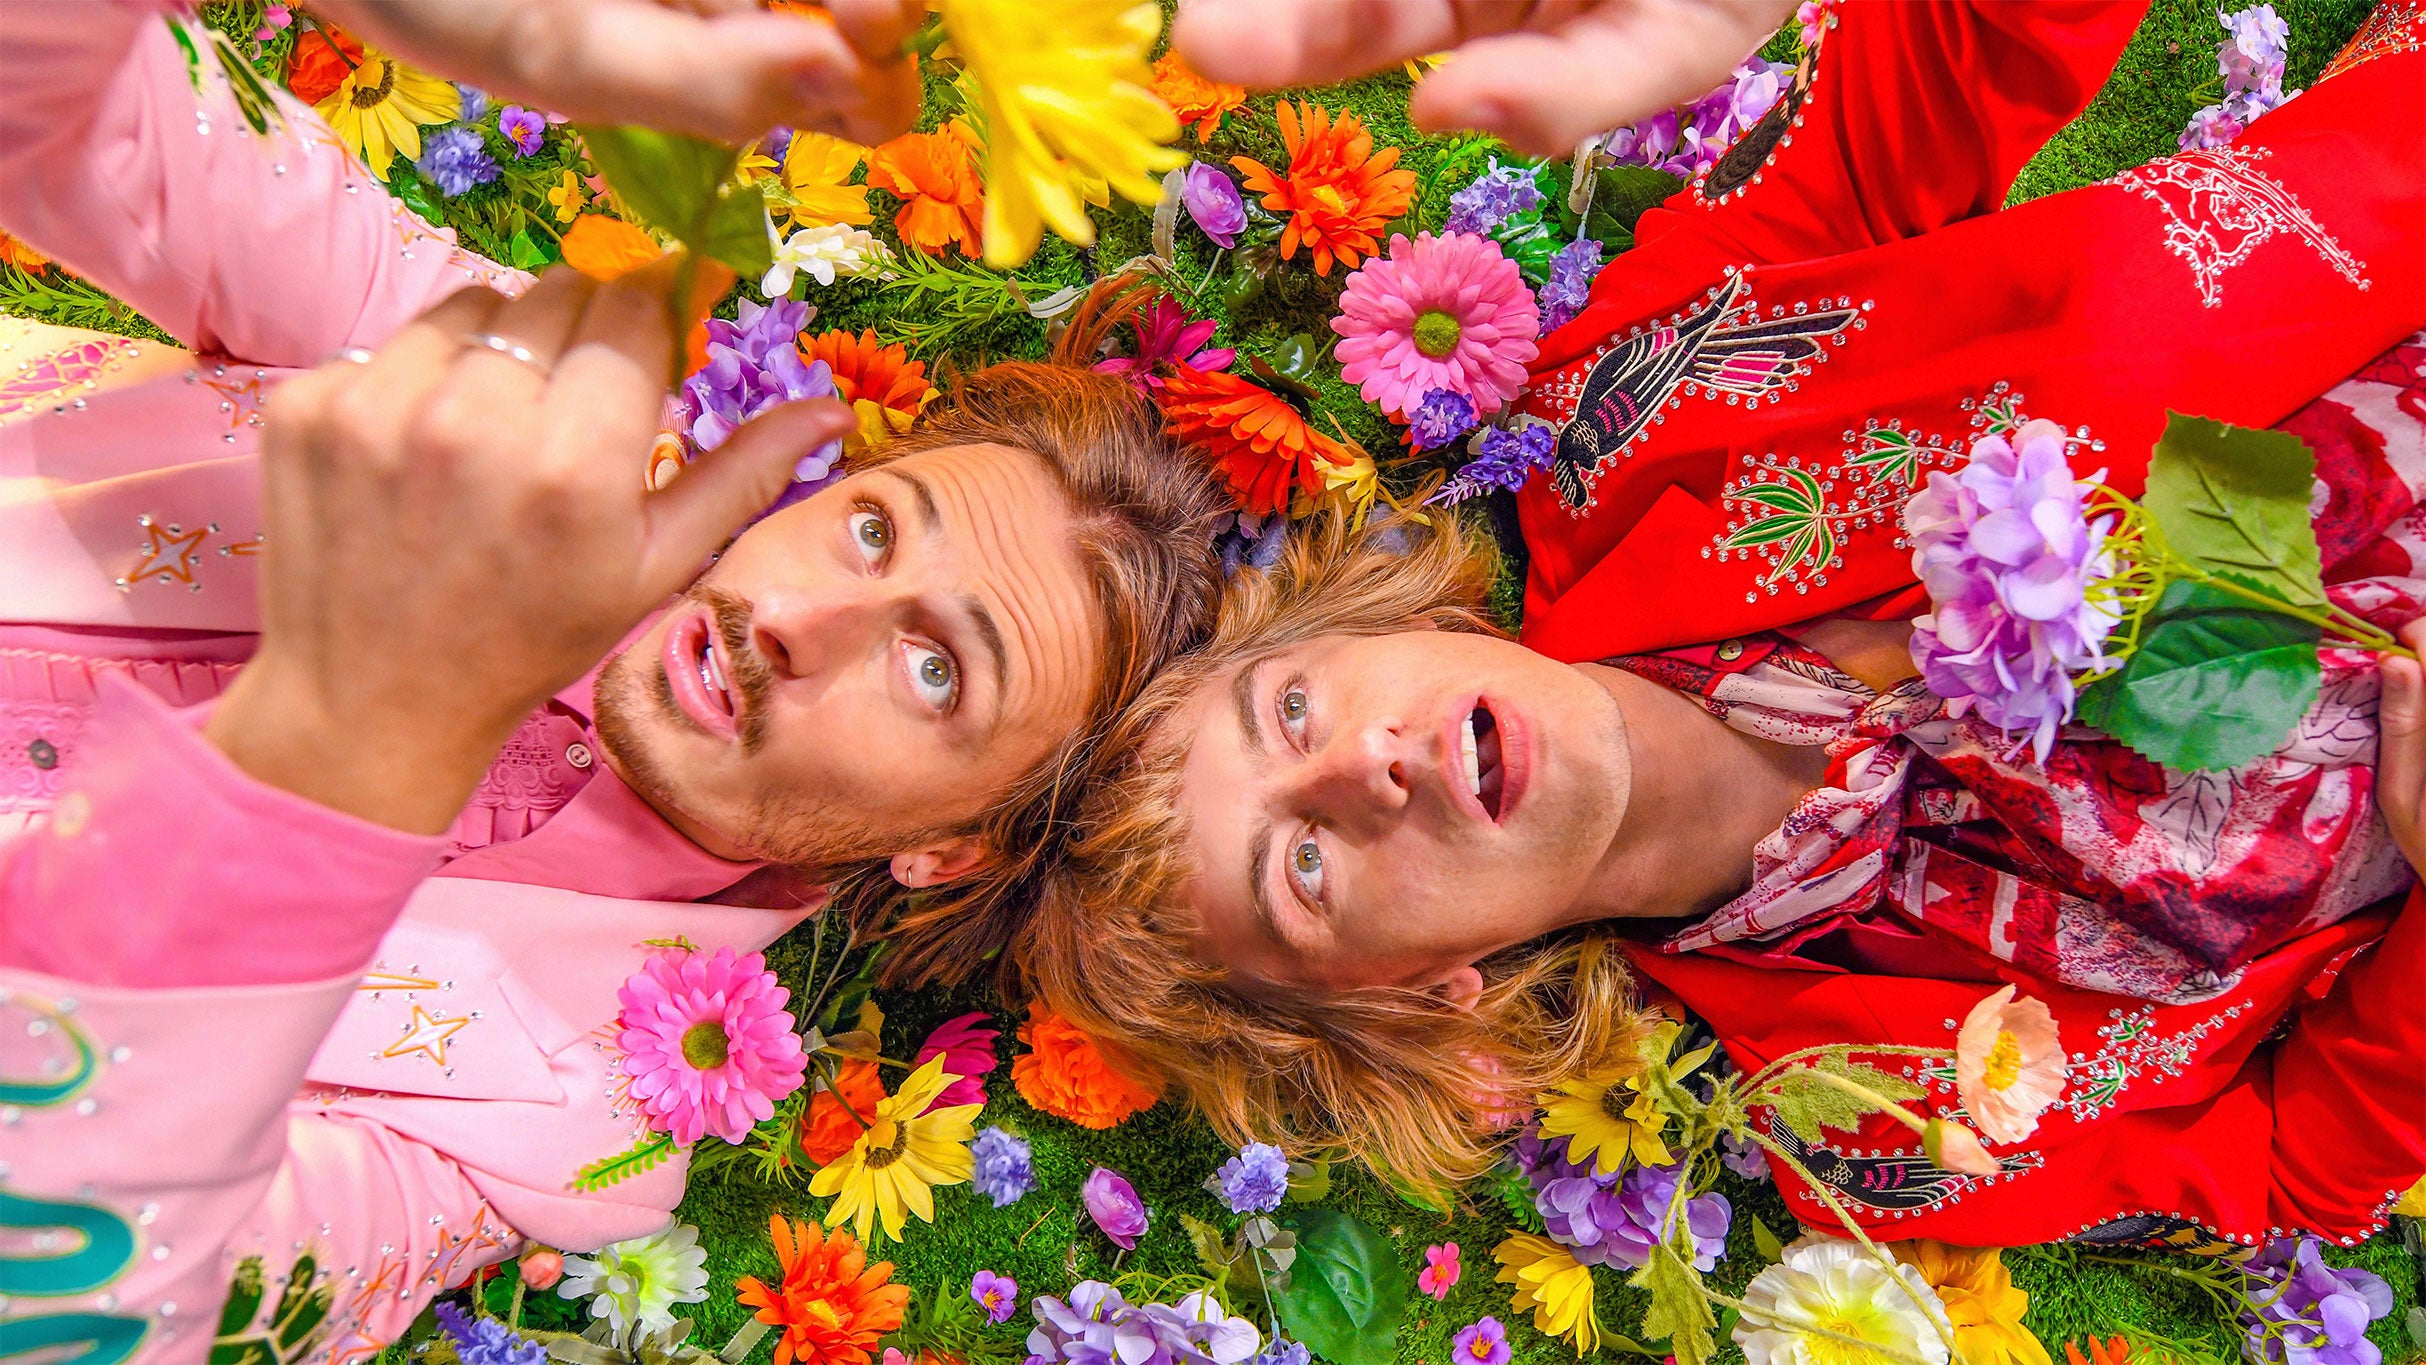 Lime Cordiale - 14 Steps To A Better You New Zealand Tour